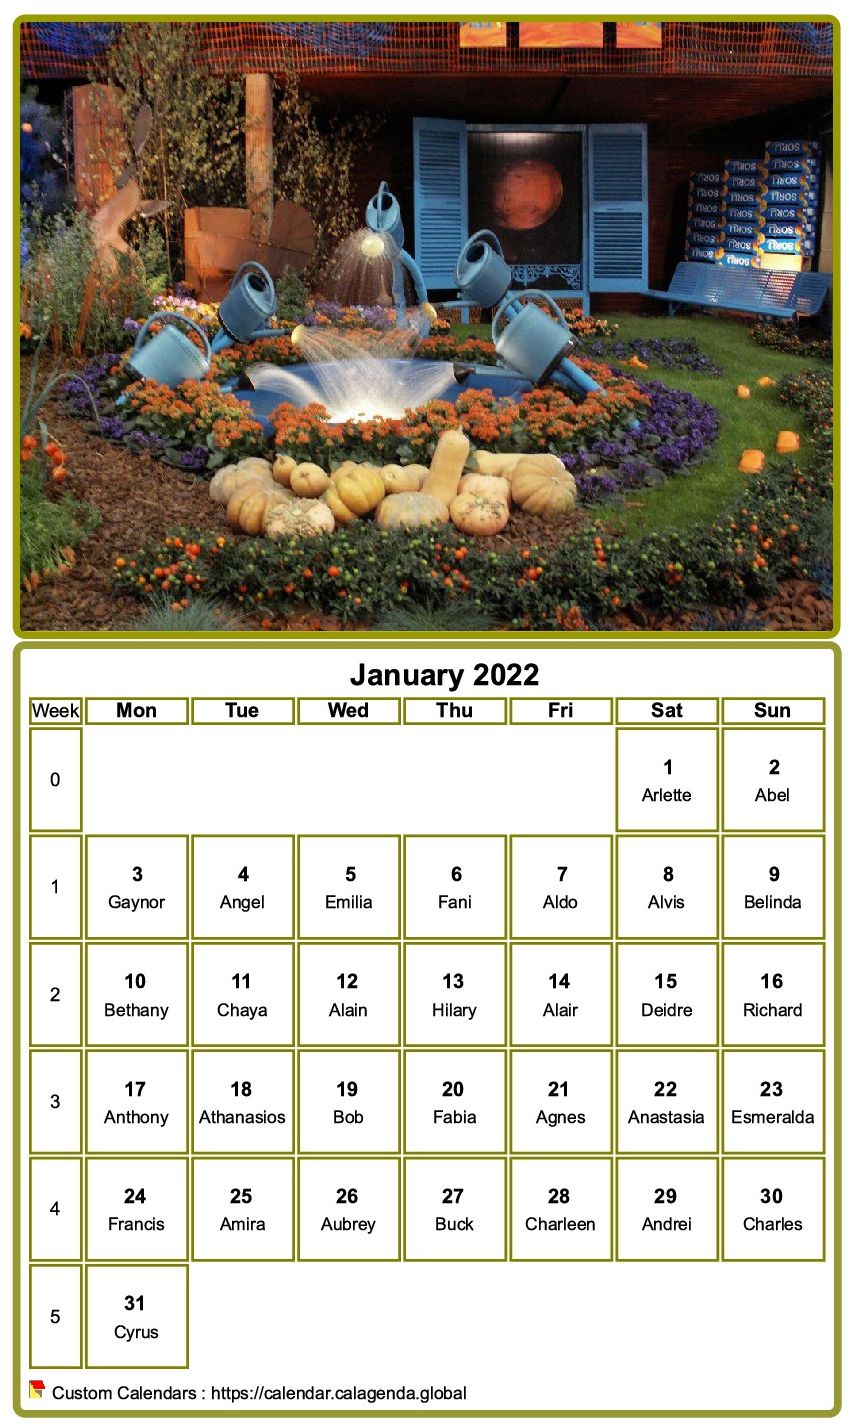 Calendar 2022 to print, monthly, with photo at the top